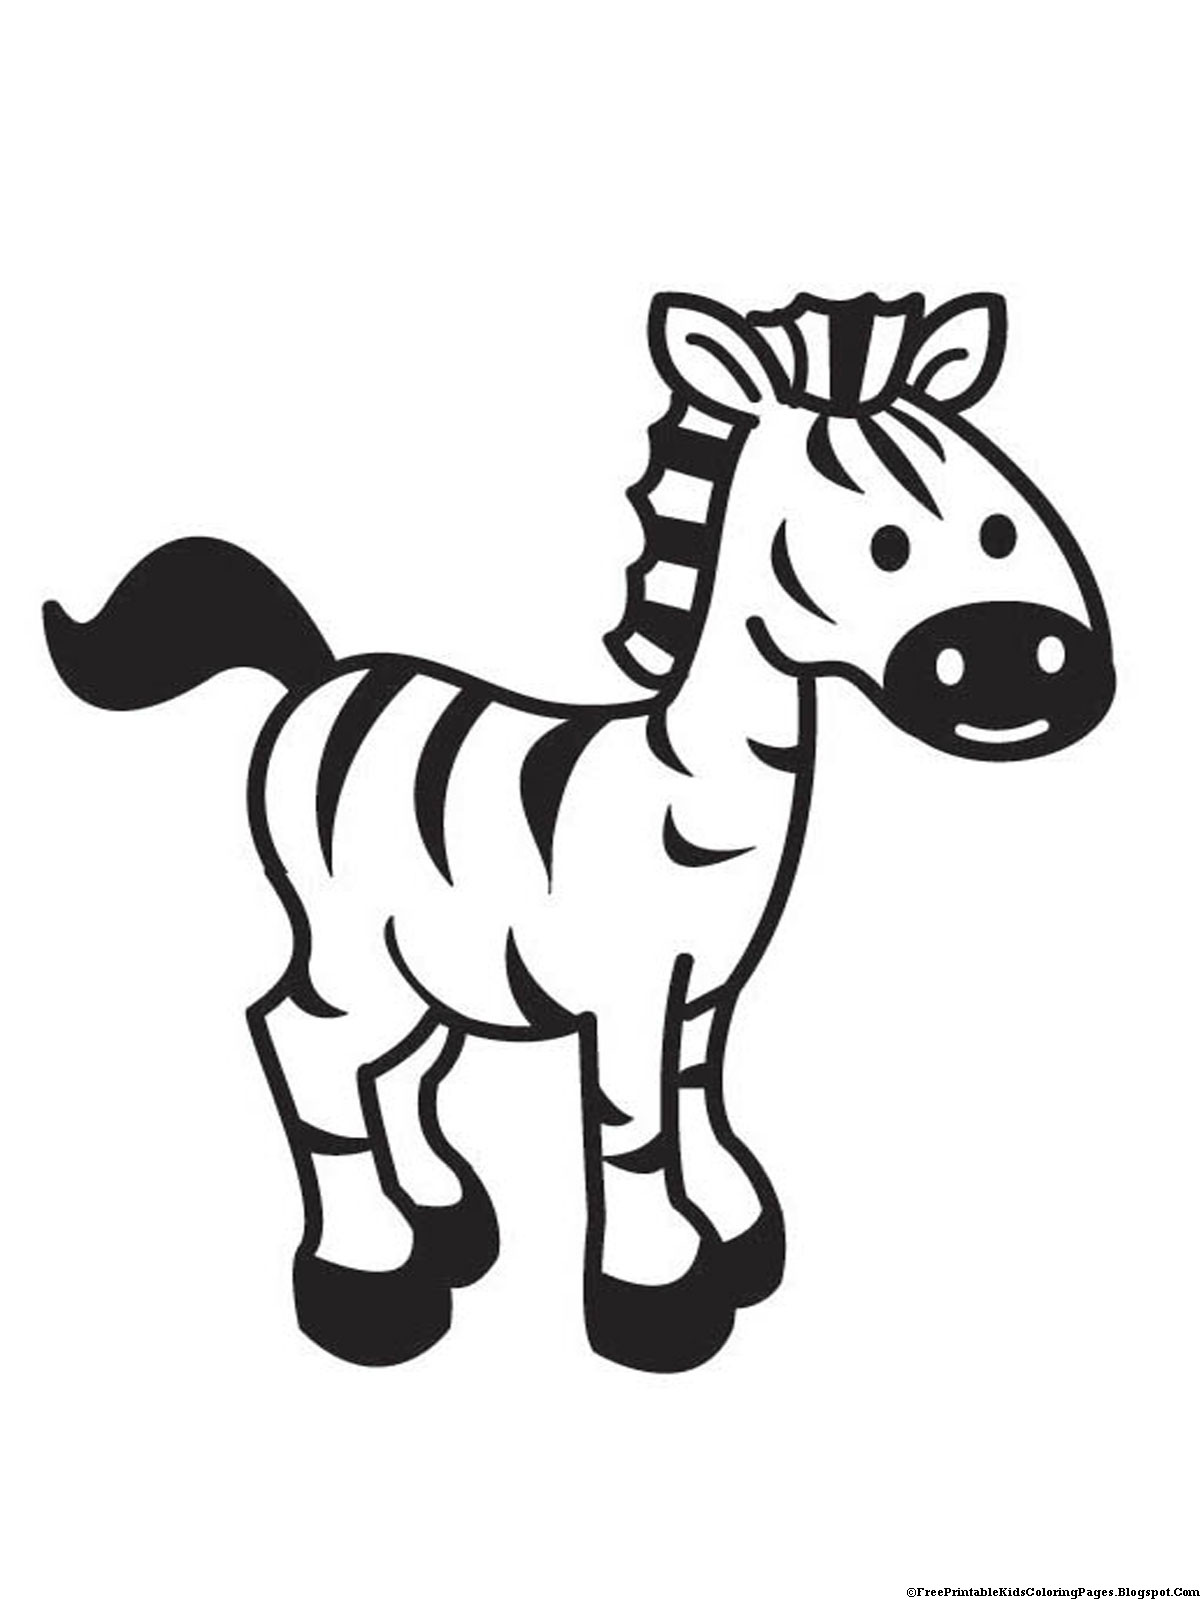 Zebra Coloring Pages Printable
 Zebra Coloring Pages Free Printable Kids Coloring Pages